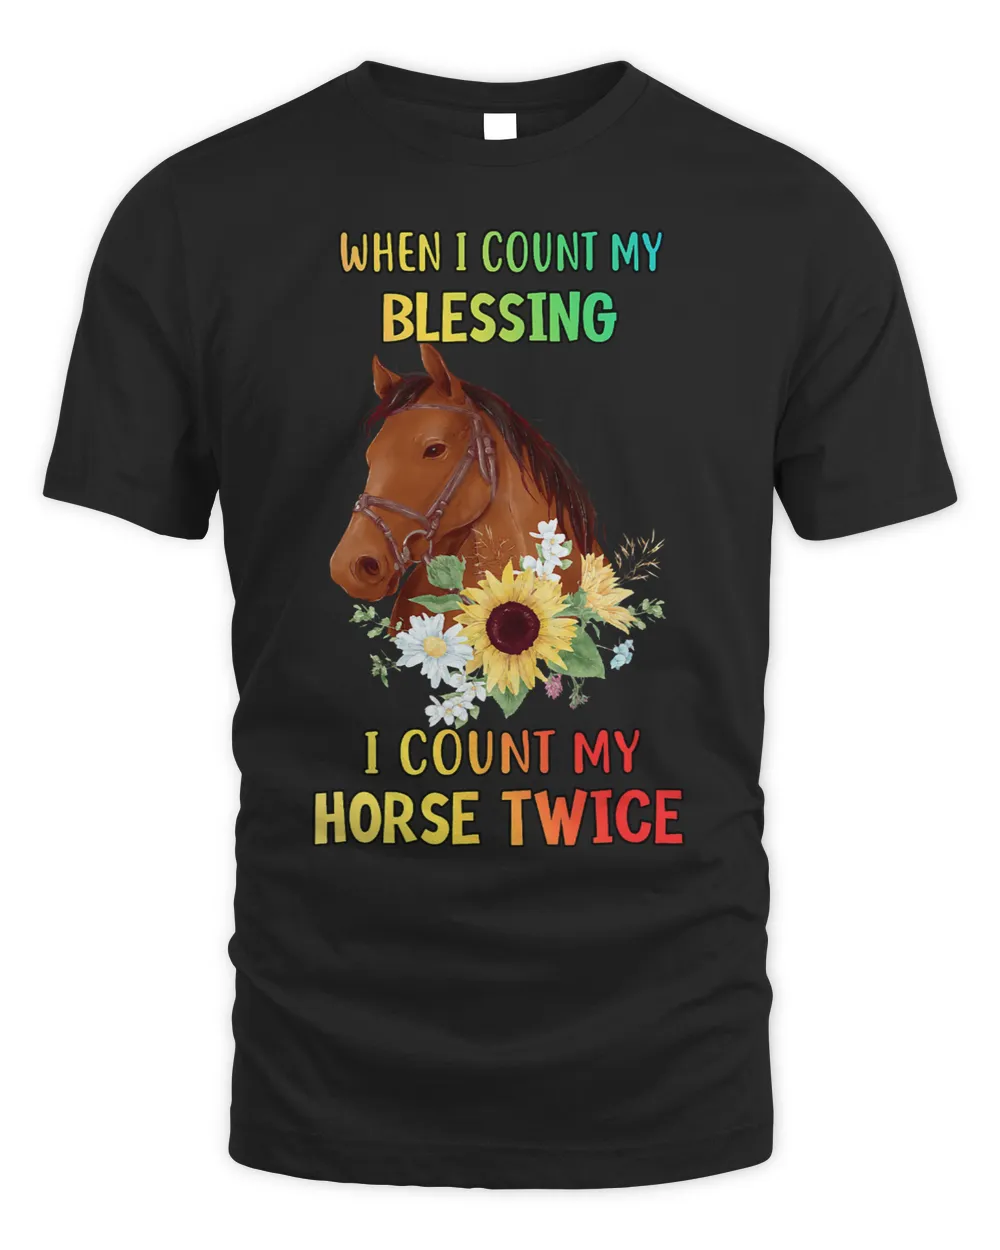 Count My Blessing Count My Horse Funny Saying Novelty